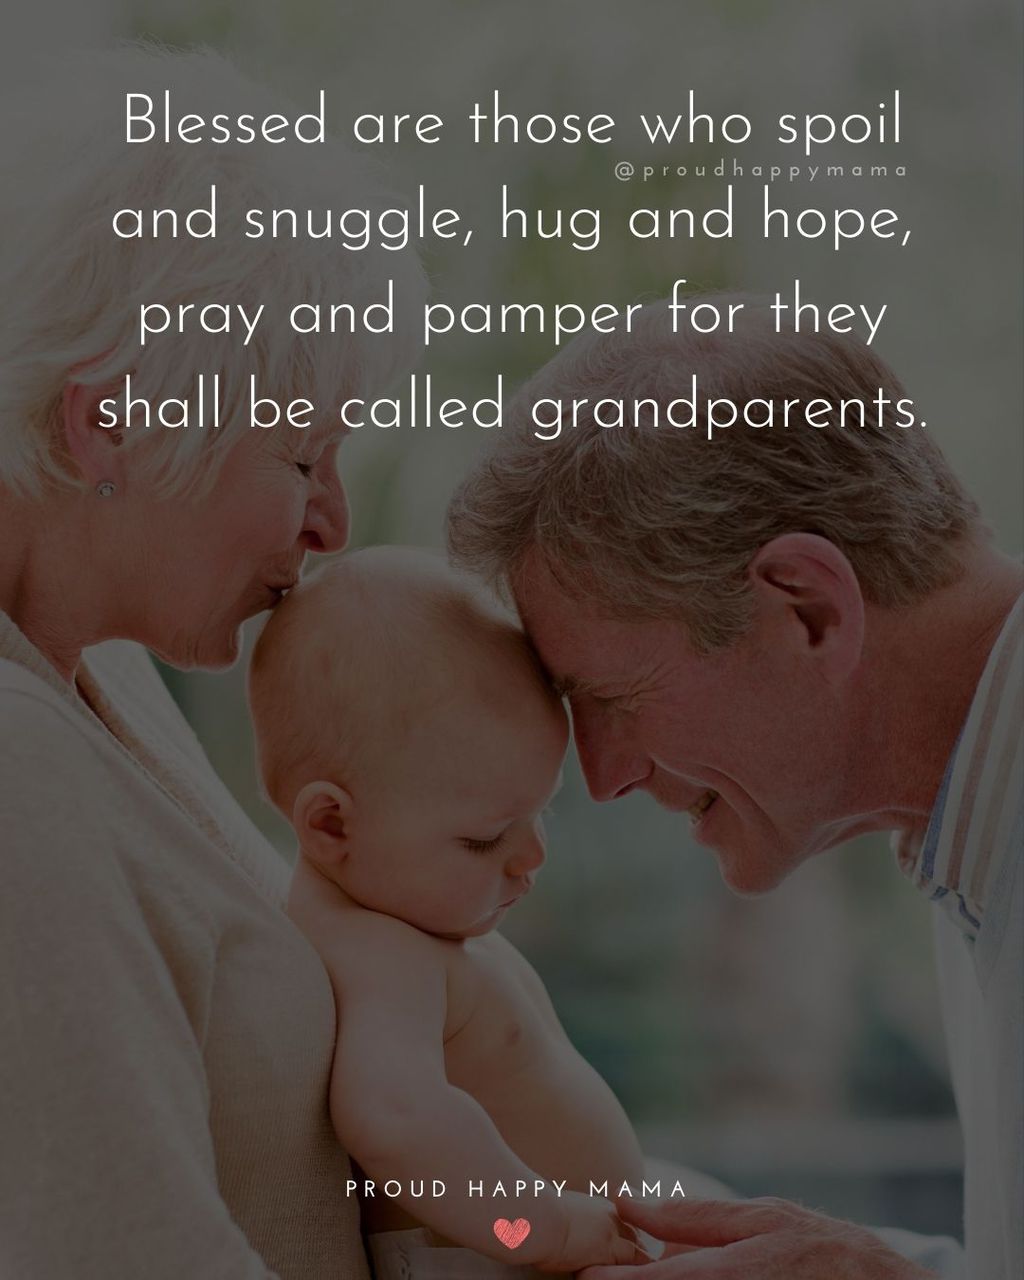 Quotes For Grandparents | Blessed are those who spoil and snuggle, hug and hope, pray and pamper for they shall be called grandparents.